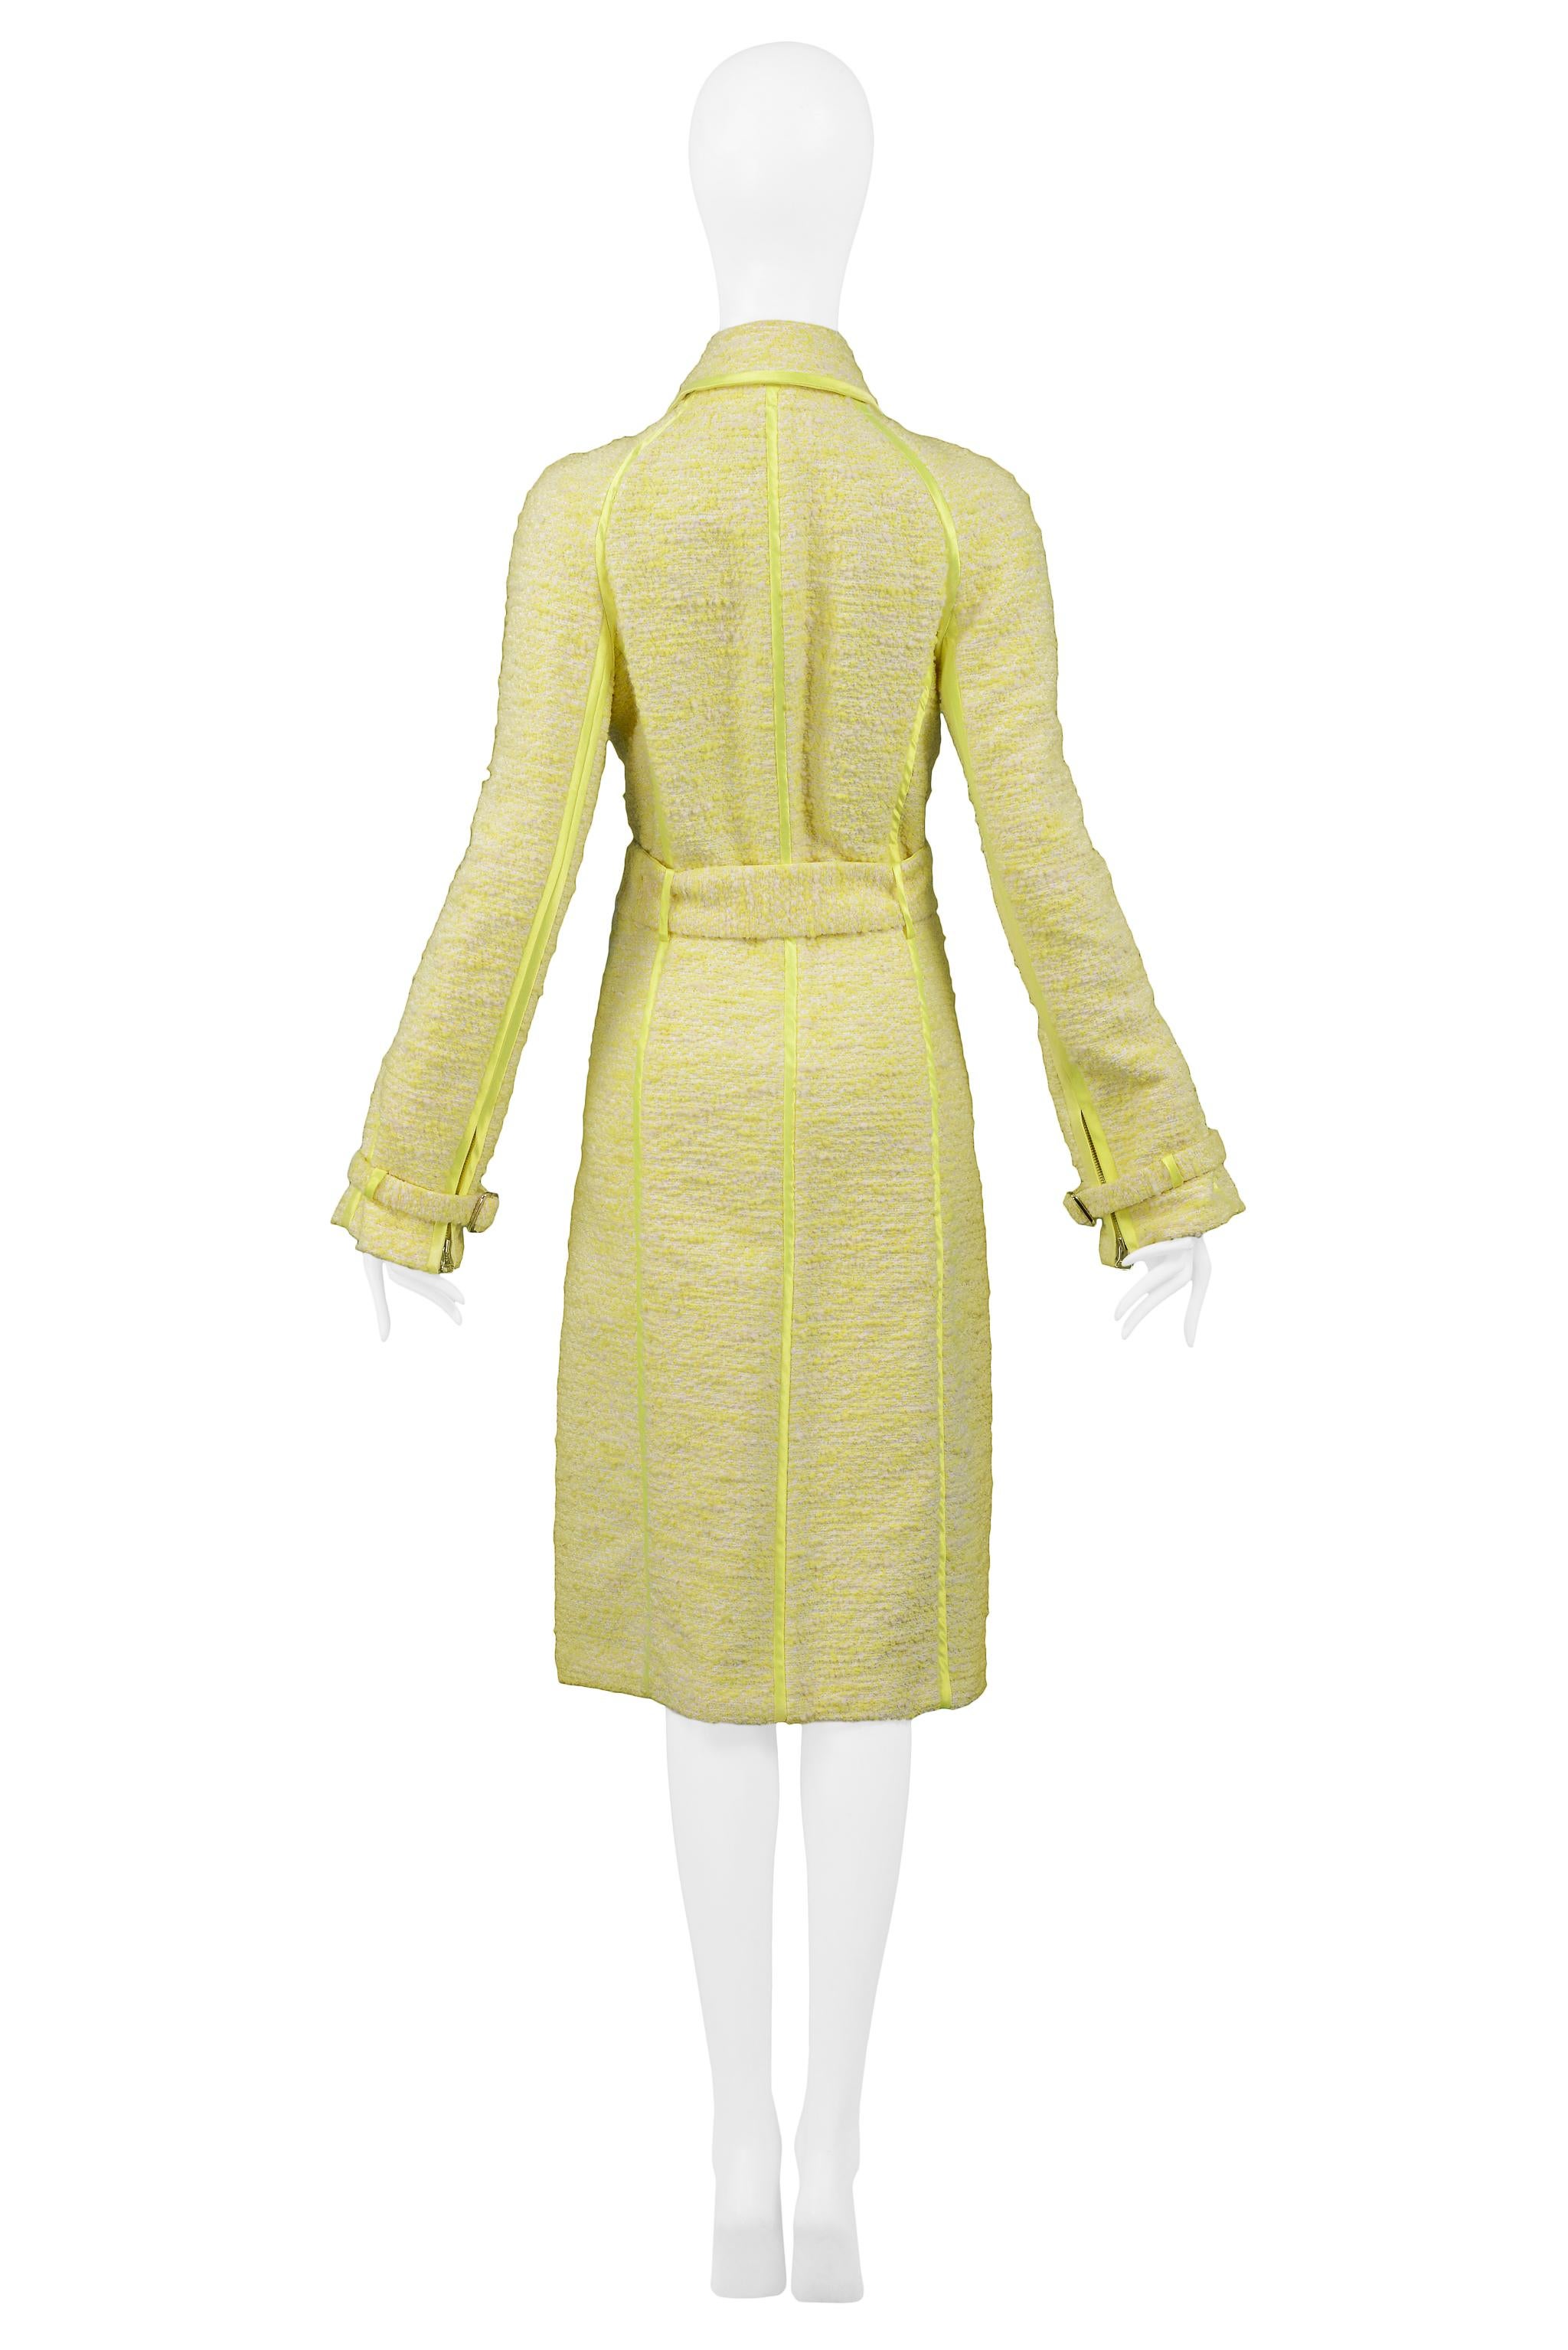 Gianfranco Ferre Citron Yellow Boucle Belted Coat 2004 In Excellent Condition For Sale In Los Angeles, CA